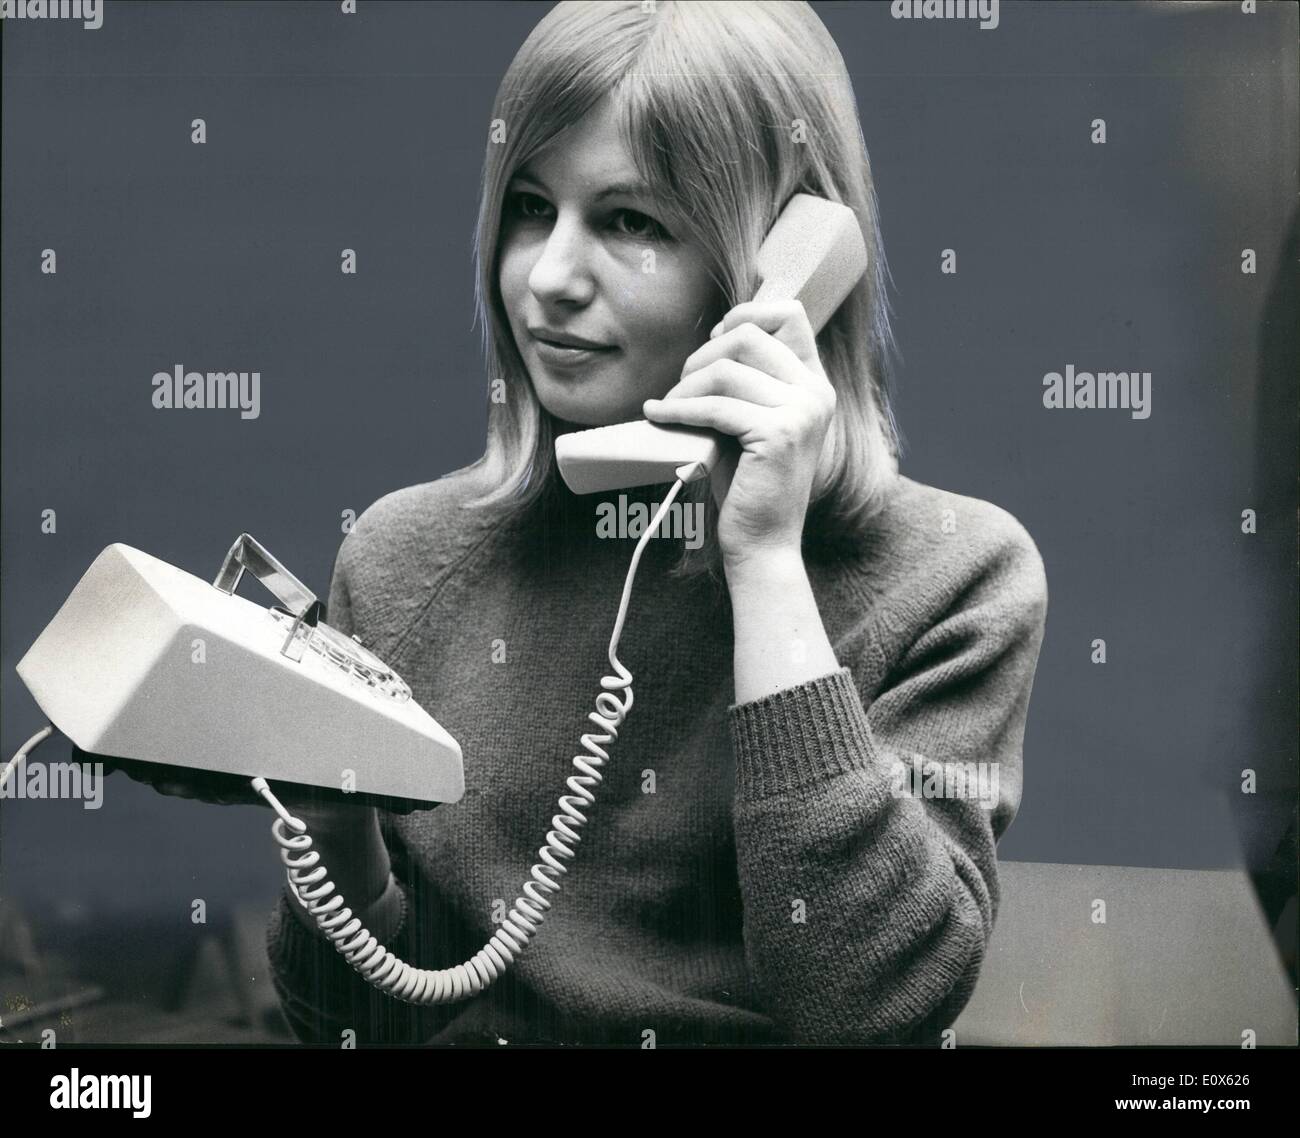 May 05, 1965 - the Telephone That Warbles: This is the new British telephone that ''Warbles'' rather than rings. The tony lightweight phone, being tried out here by secretary Liza Higgs, warbles very softly at first. Then it builds up to a ''peak warble'' which can be set in advance by subscribers. Soon 1000 of the new phone will be installed for testing. Later it will become standard equipment throughout the Britain, gradually replacing the present model Stock Photo